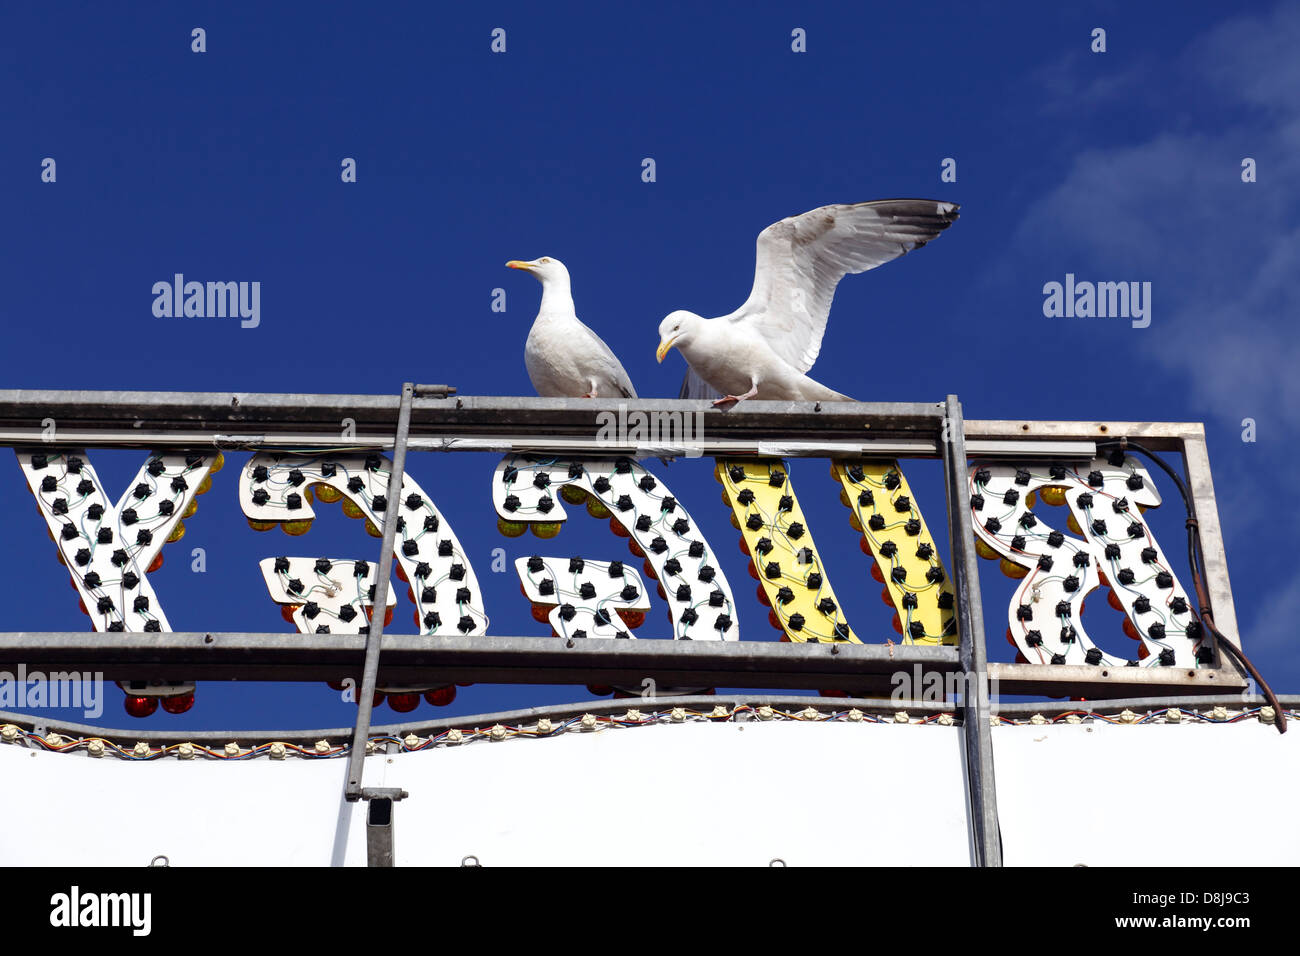 Two seagulls perched on a sign at a fairground, UK Stock Photo